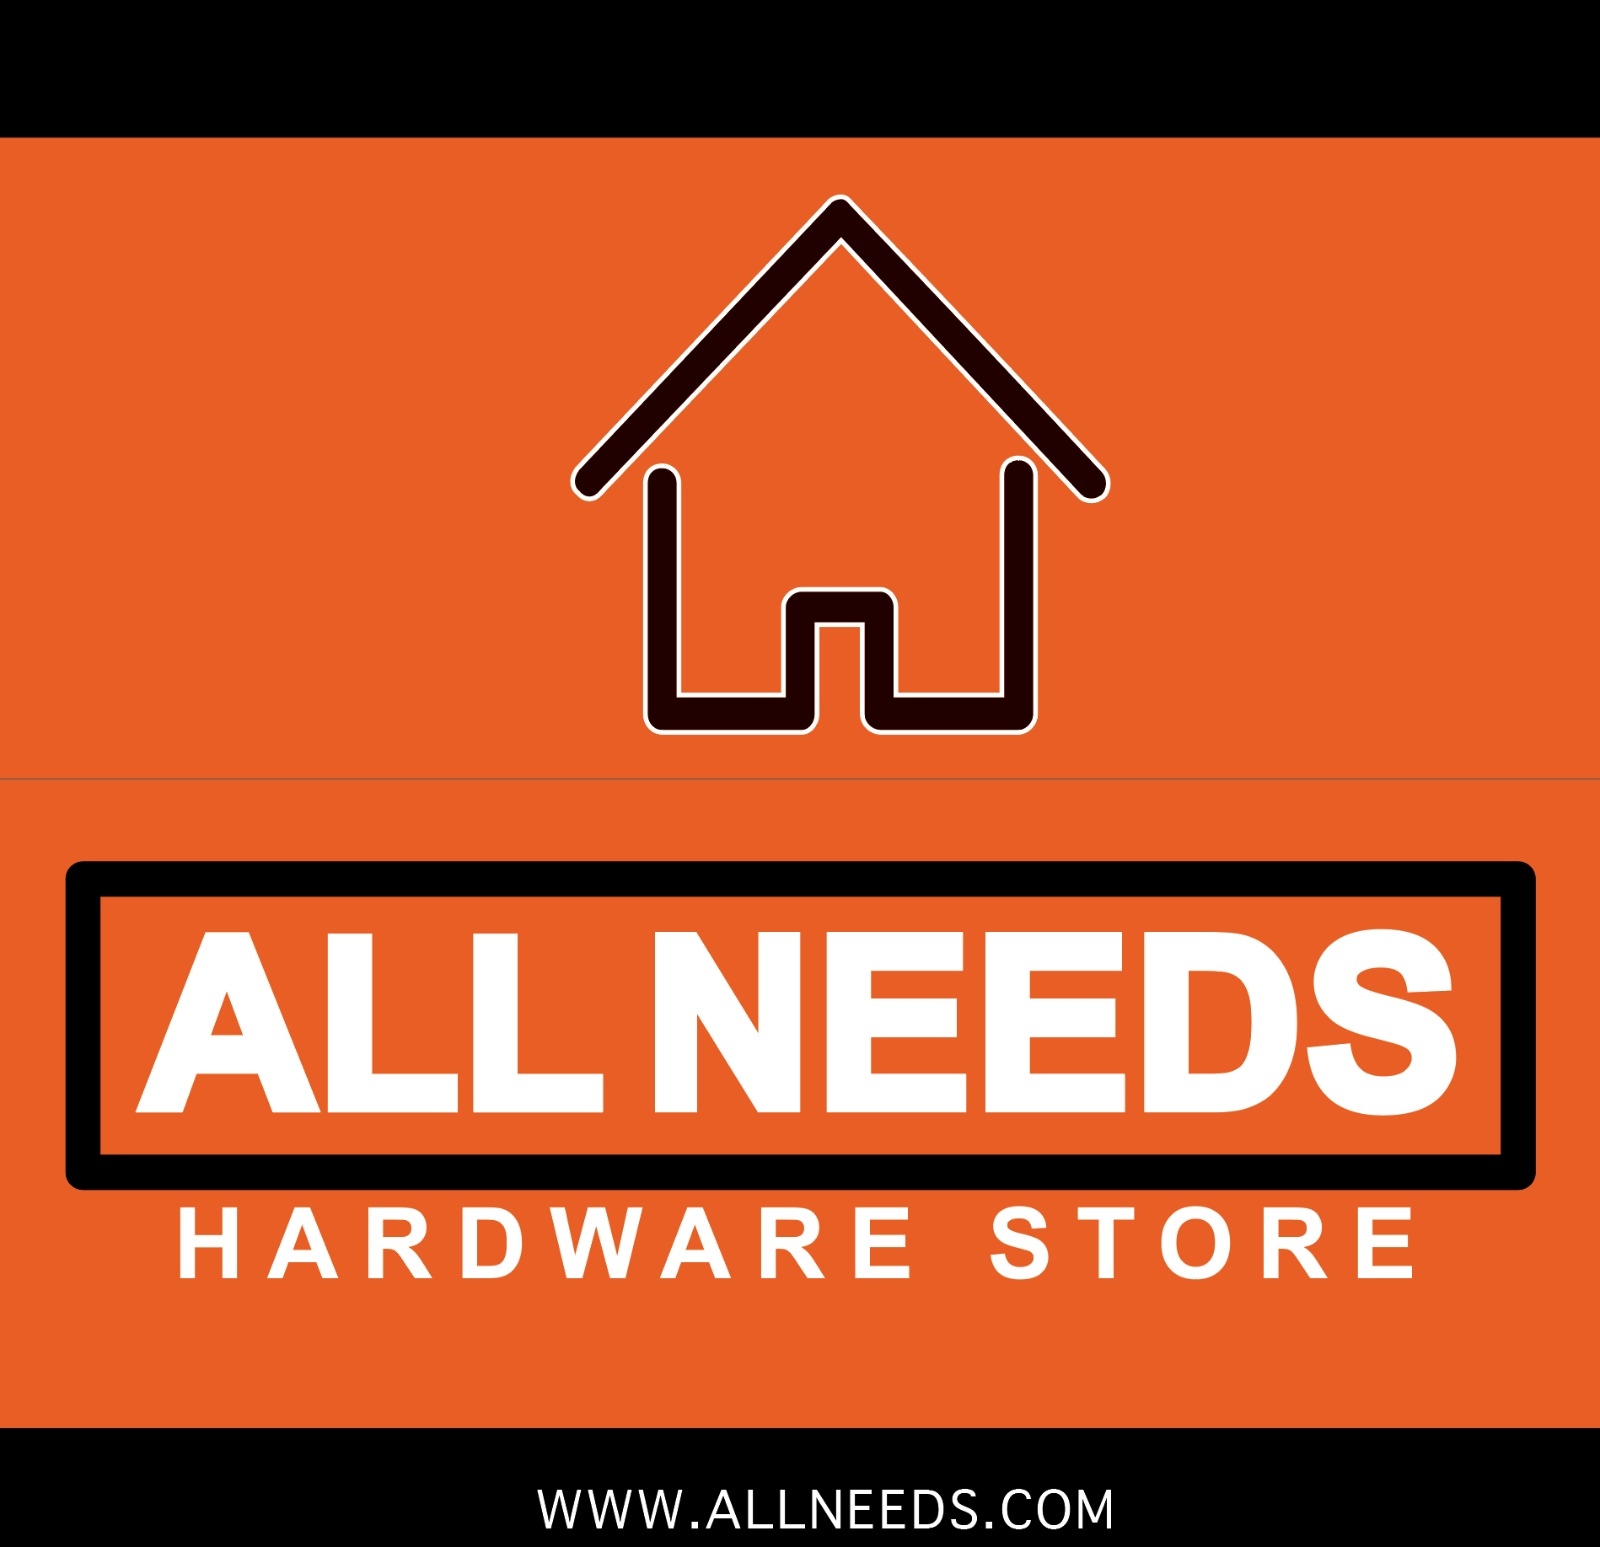 All Needs Hardware Store